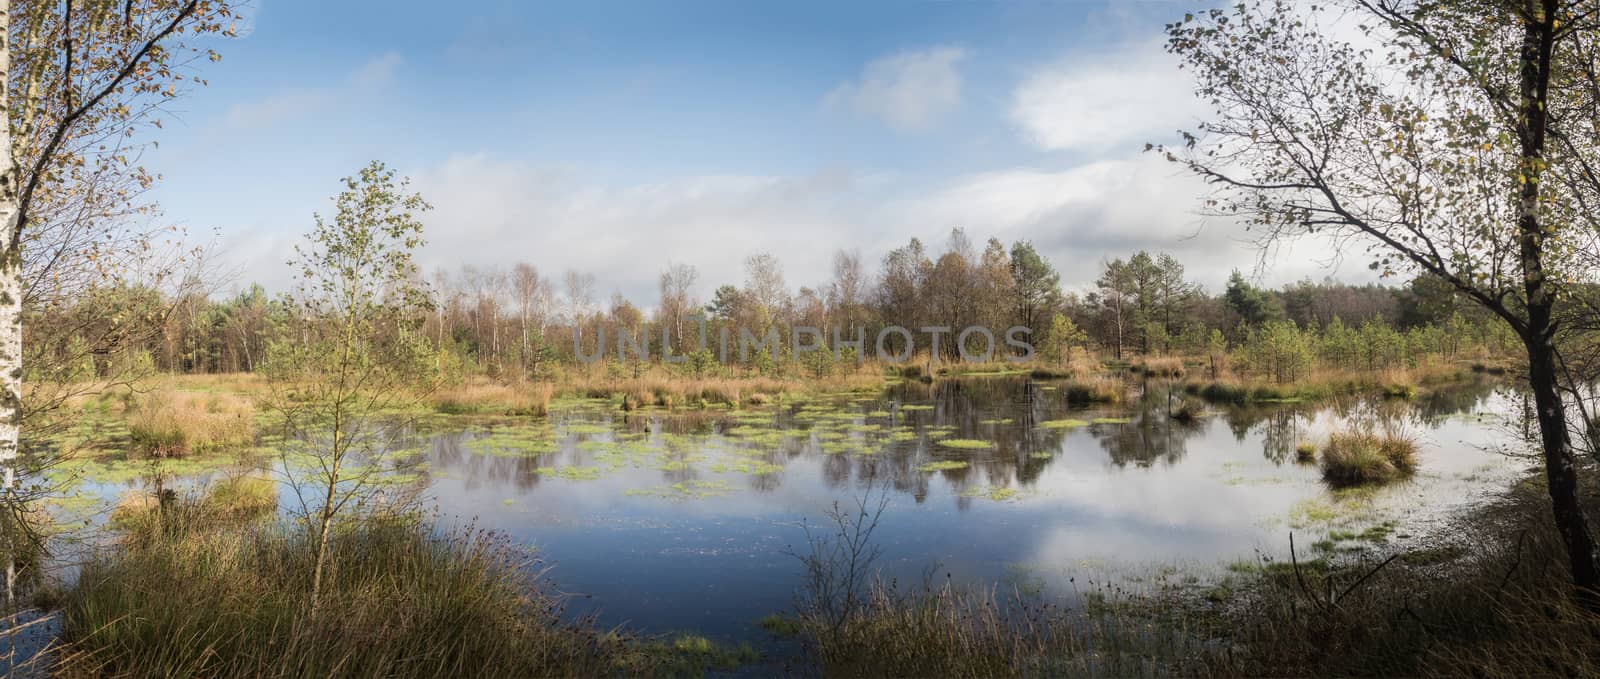 Panorma of a beautiful moor landscape in the lueneburger heide by sandra_fotodesign